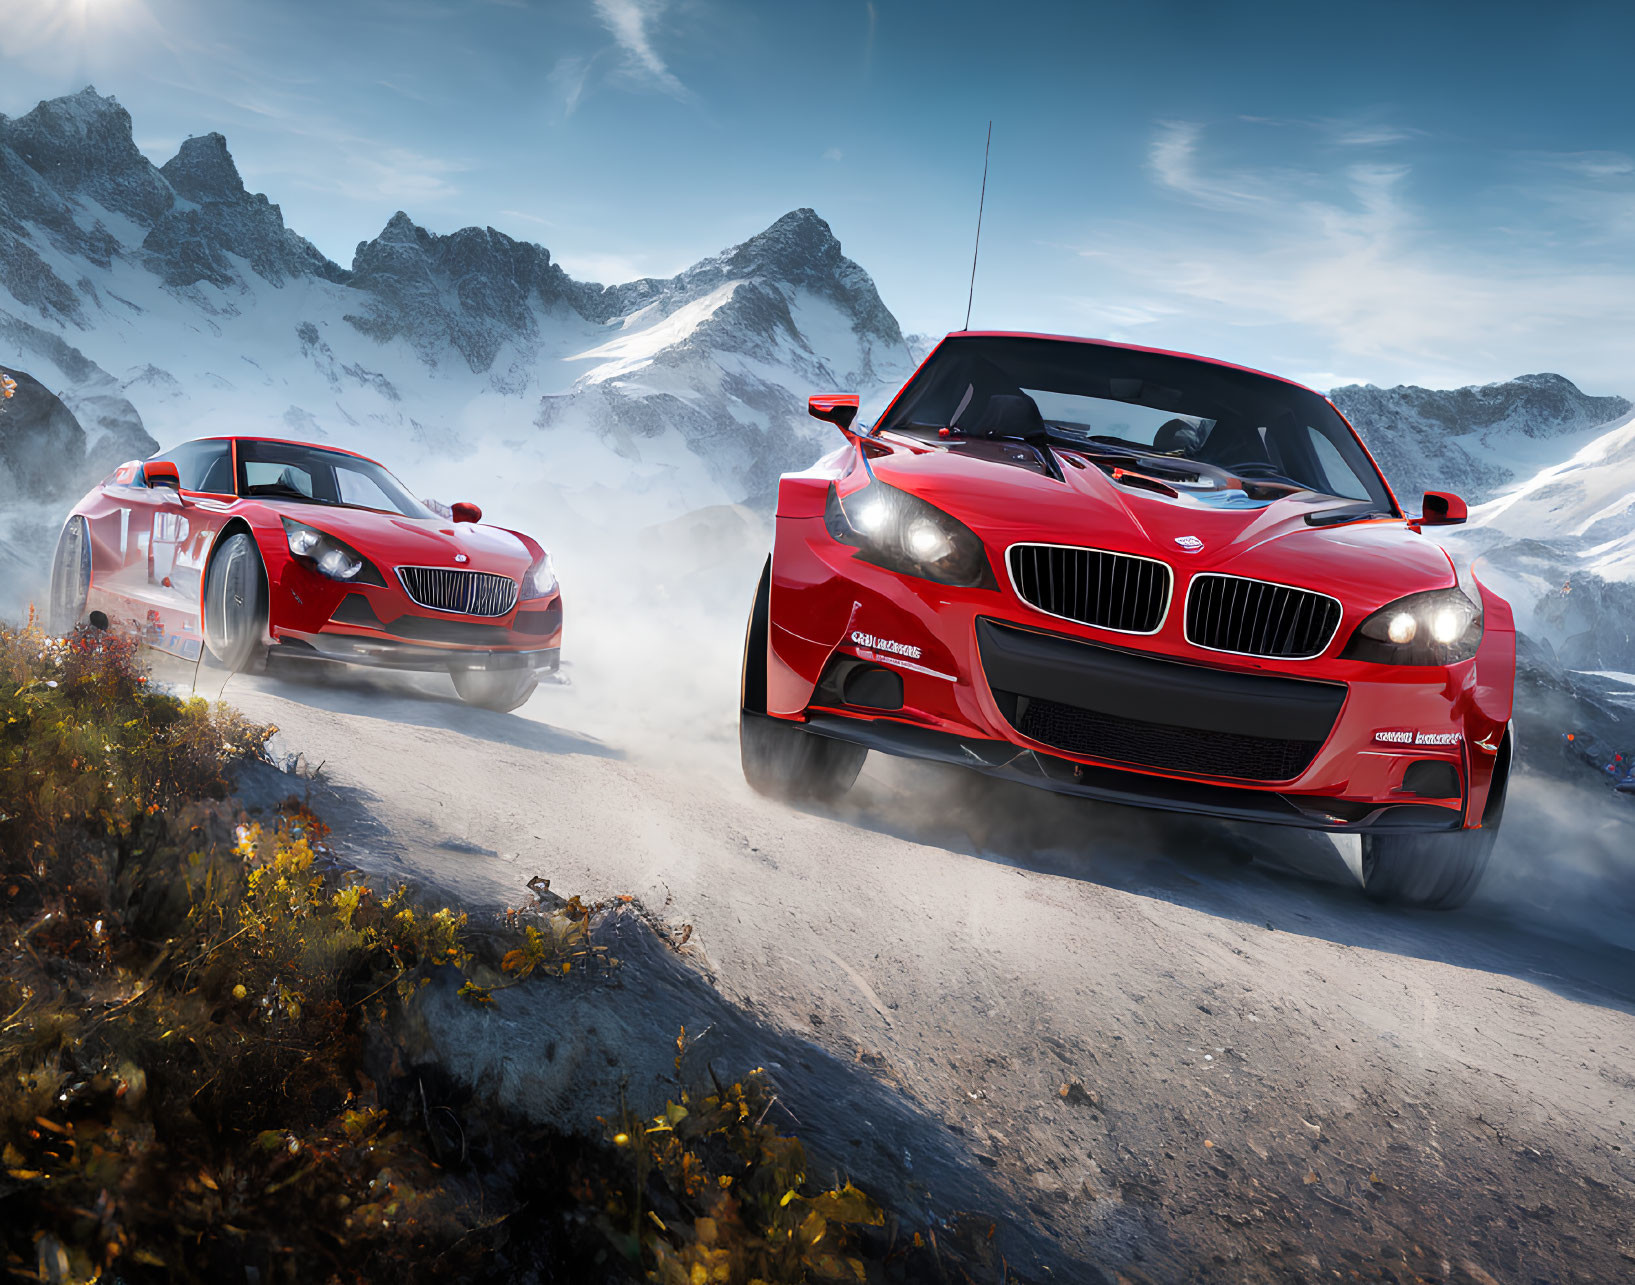 Red sports cars racing on mountain road with snow-covered peaks in background